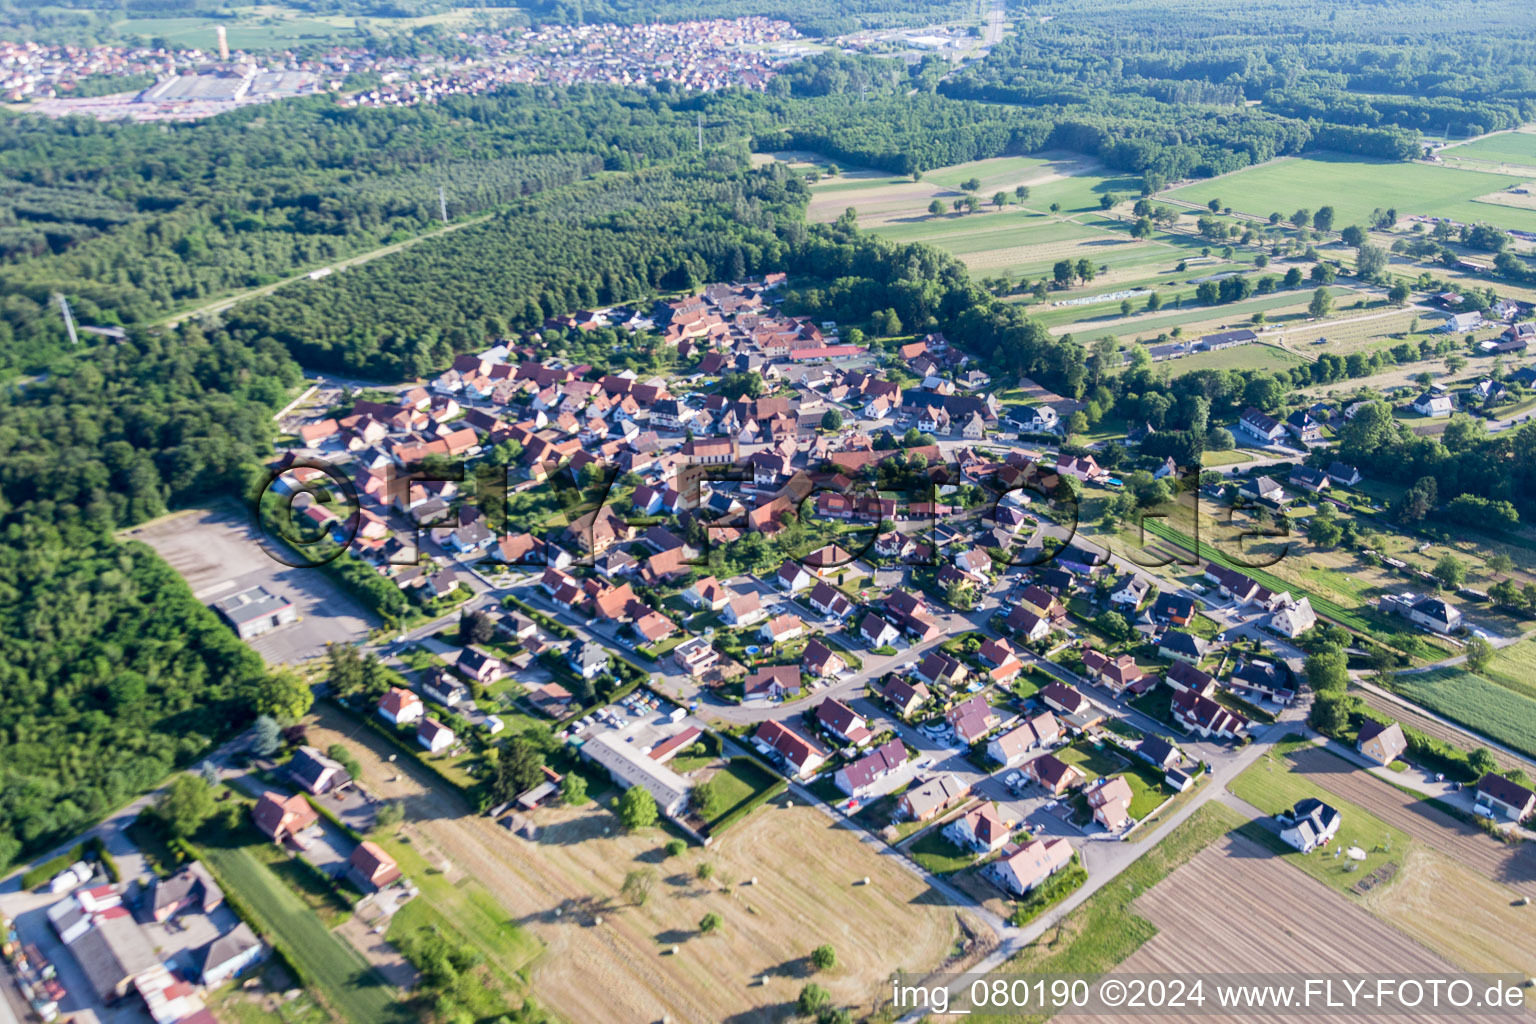 Aerial view of Village view in Schaffhouse-pres-Seltz in Grand Est, France